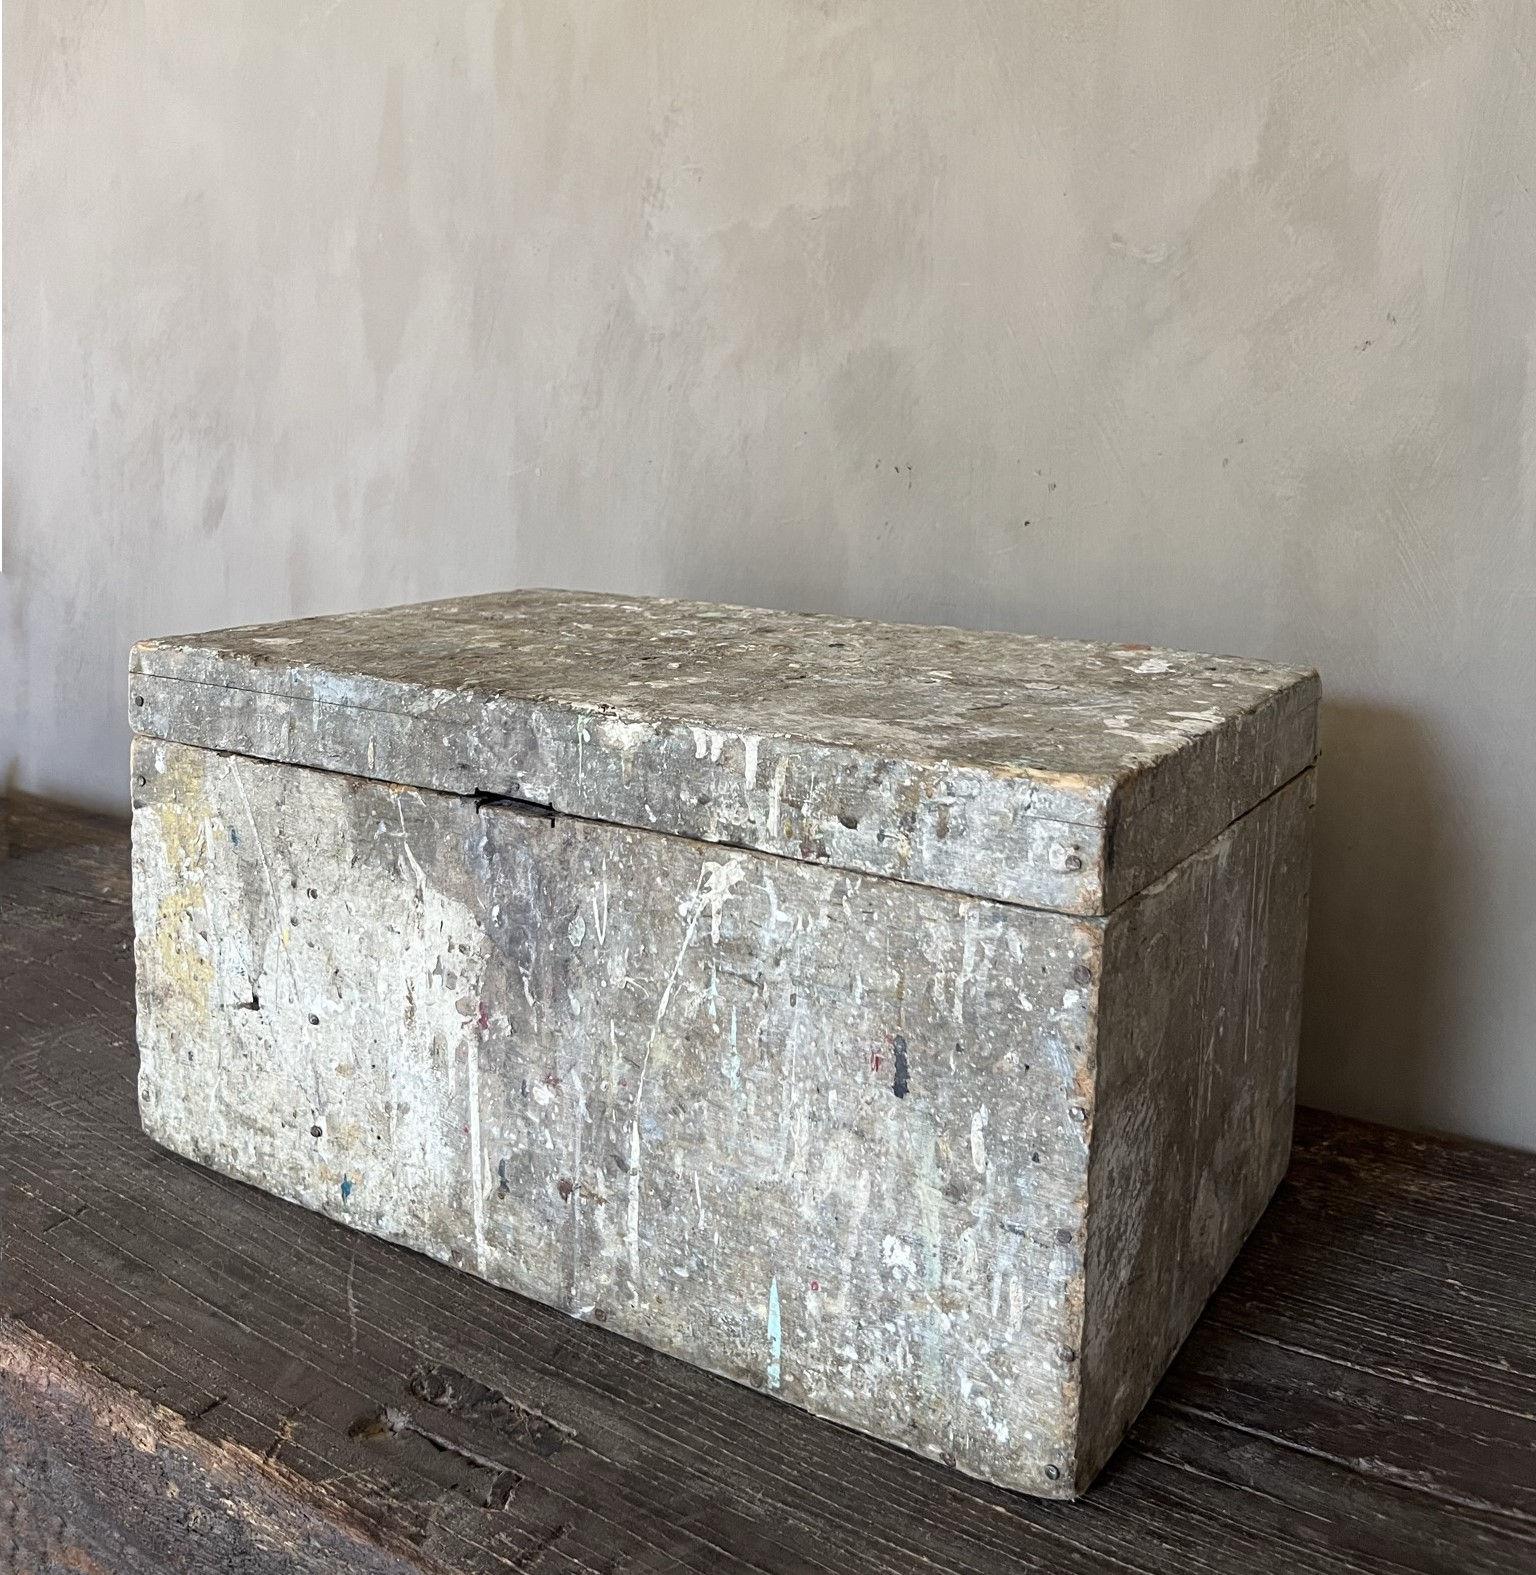 This 19th century painters box has centuries of patina. Layers and layers of paintresidues, scratches and handling has transformed this utilitary item to a intriguing object. Its structure and colors are like unintentional abstract artworks. One